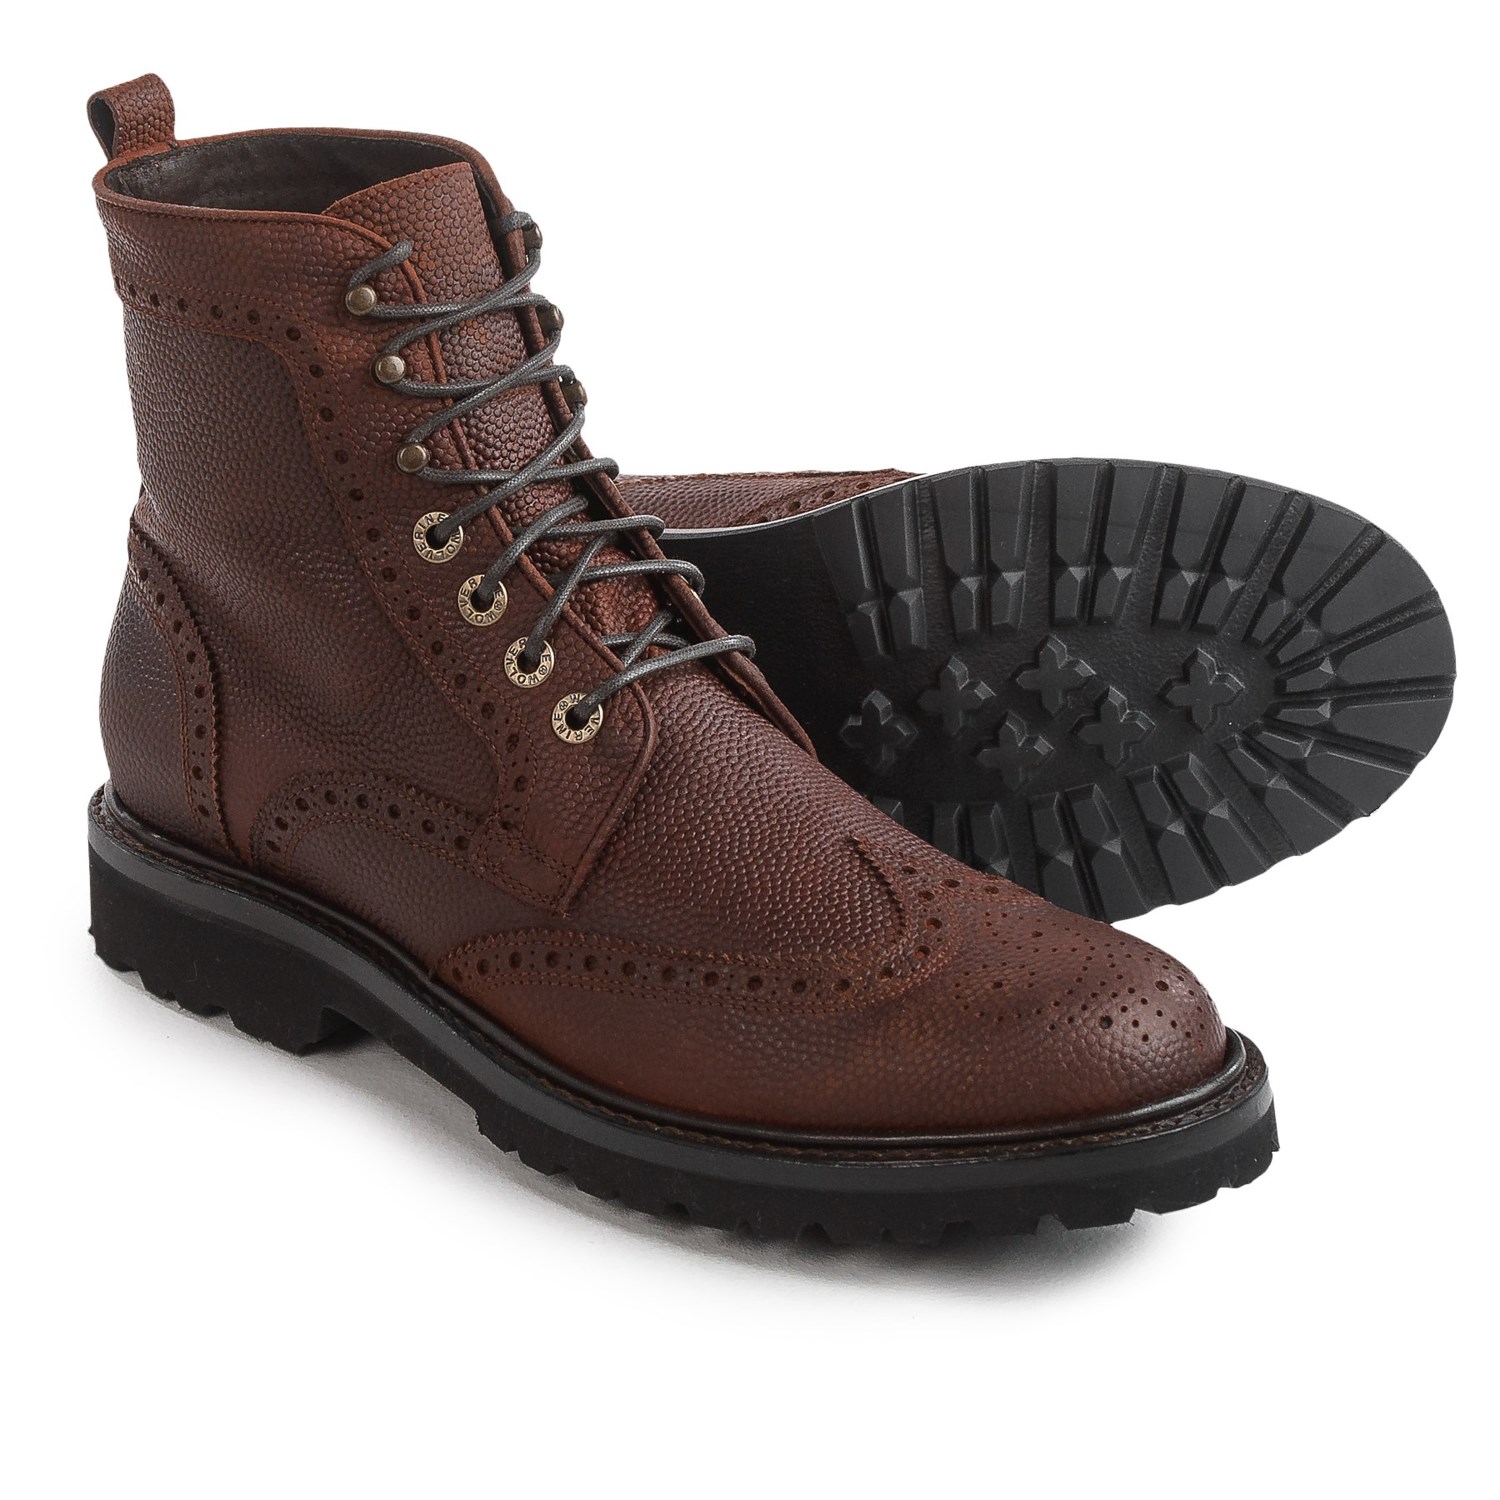 Wolverine 1883 Percy Boots (For Men) - Save 80%